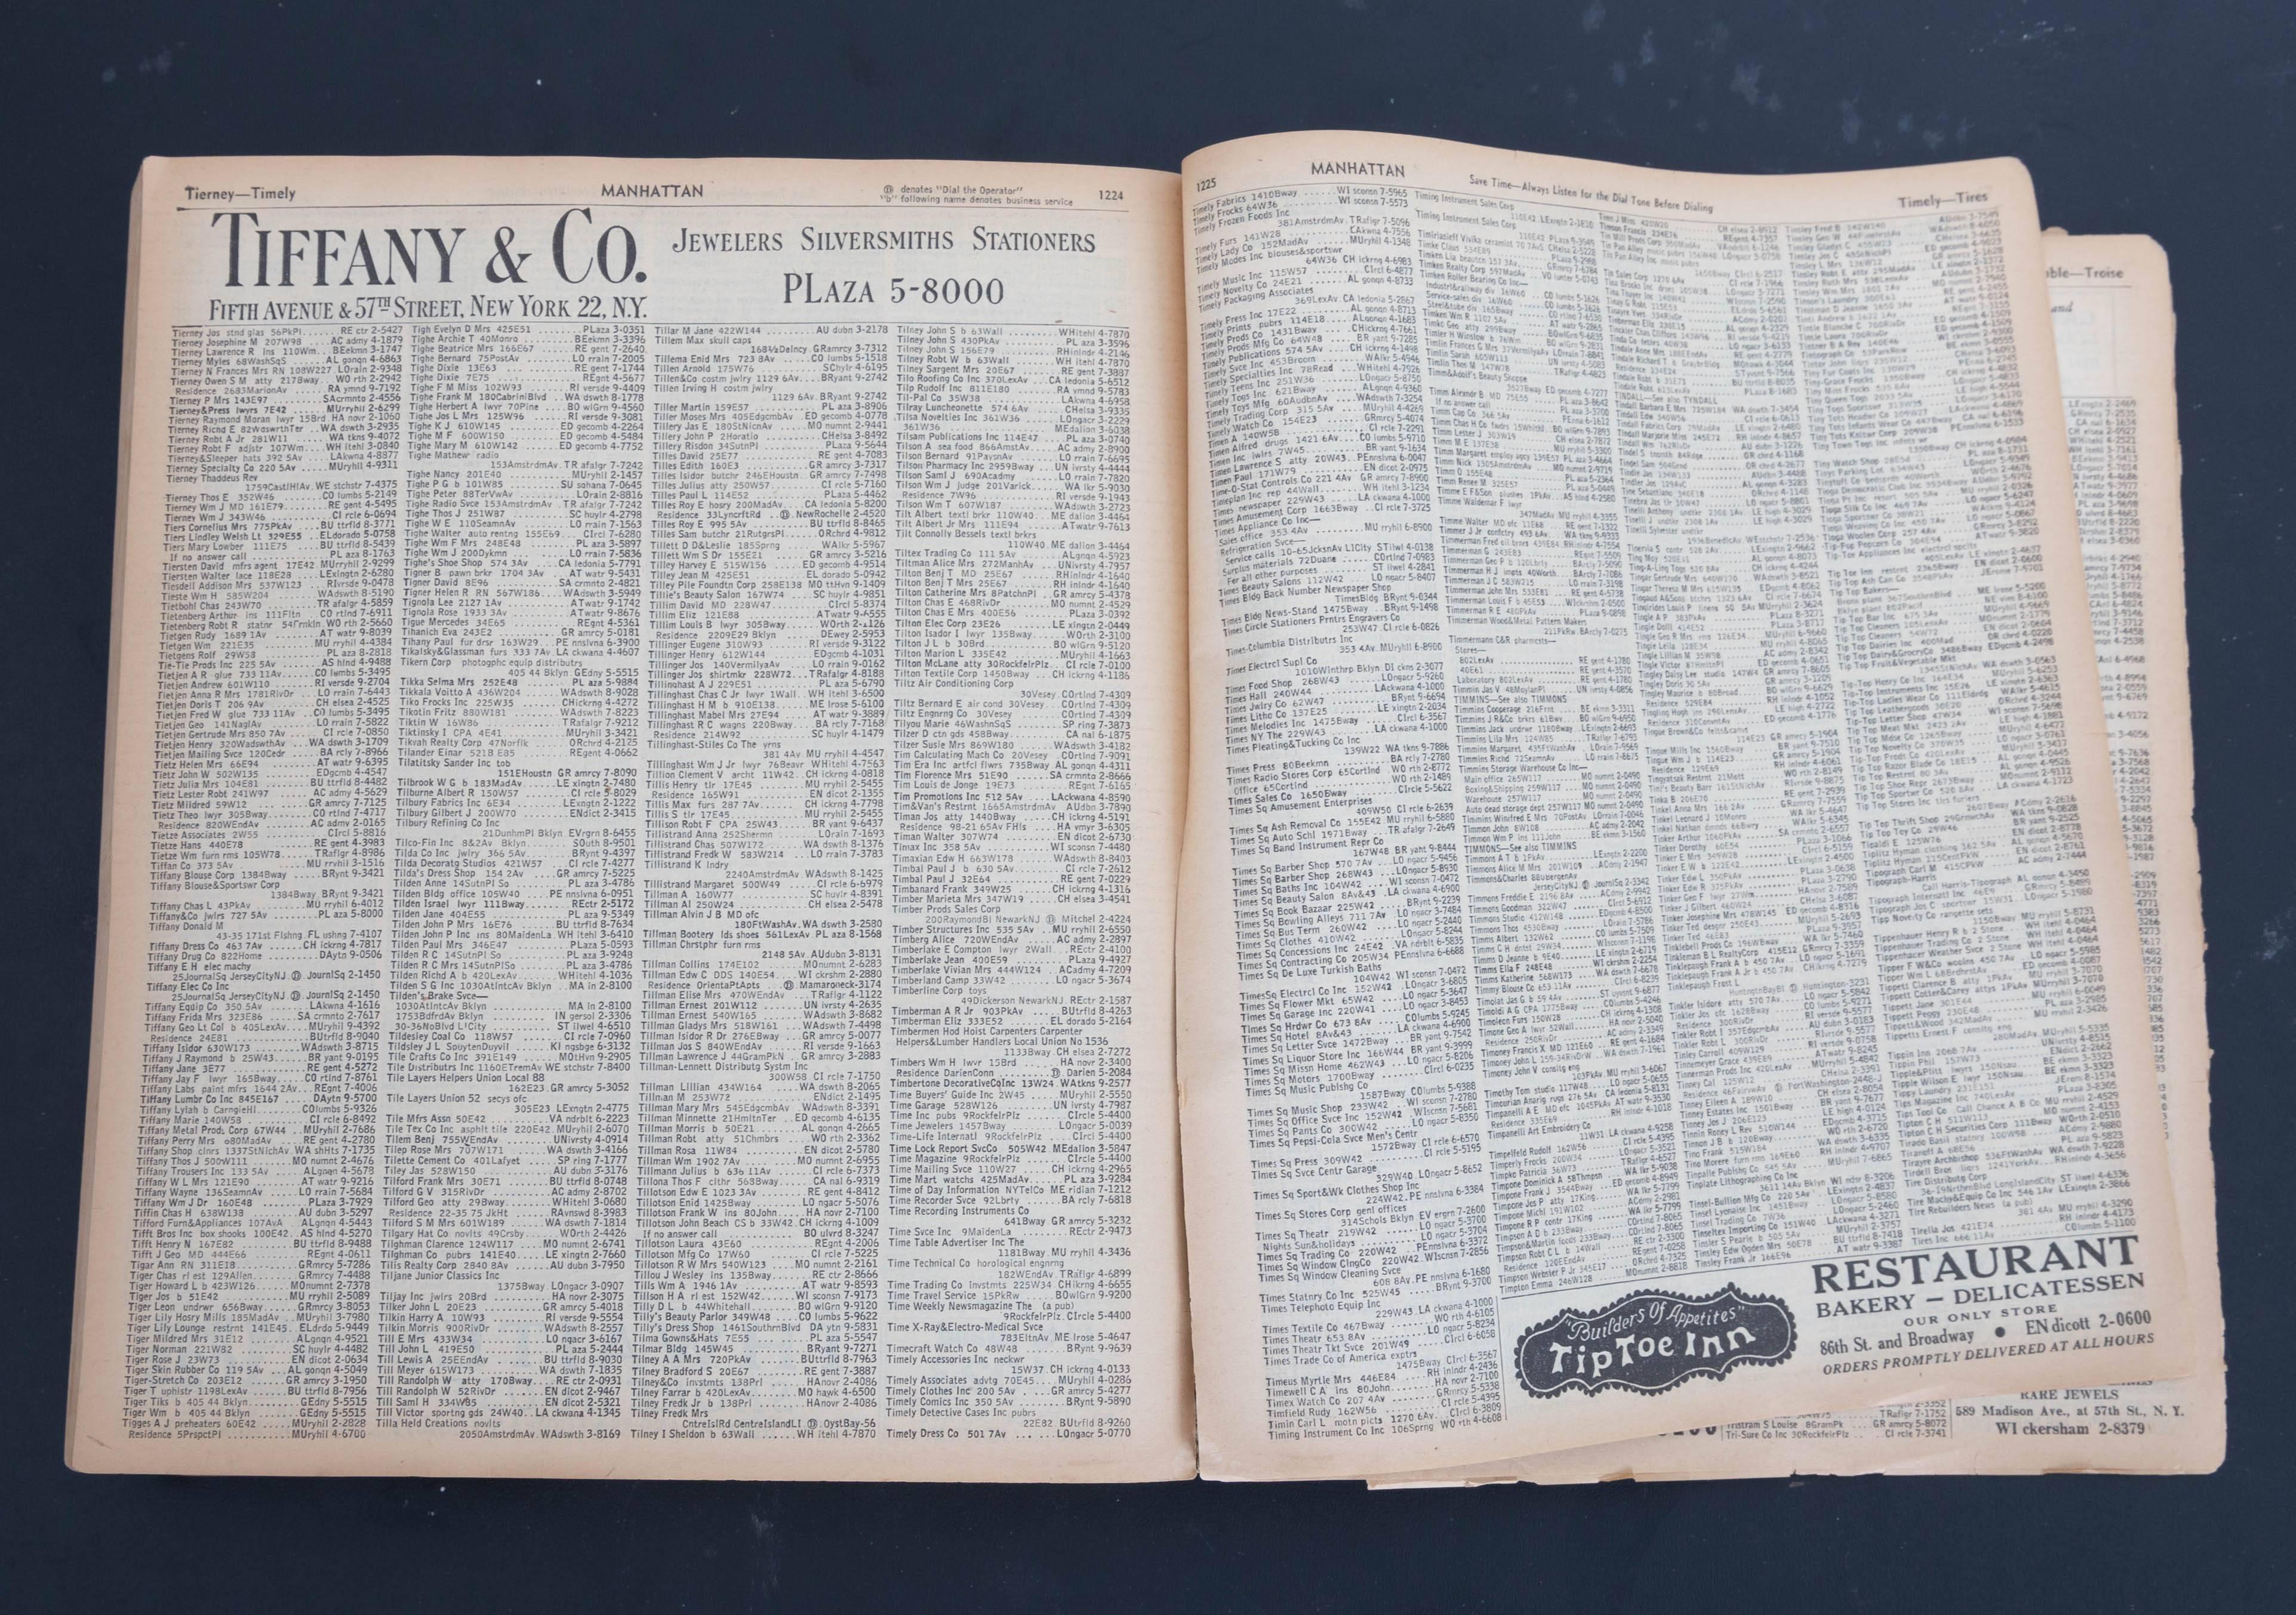 A residential and commercial phone book, listing numbers and addresses of Manhattan, NYC, 1946. 1354 pages that also have some display adv.